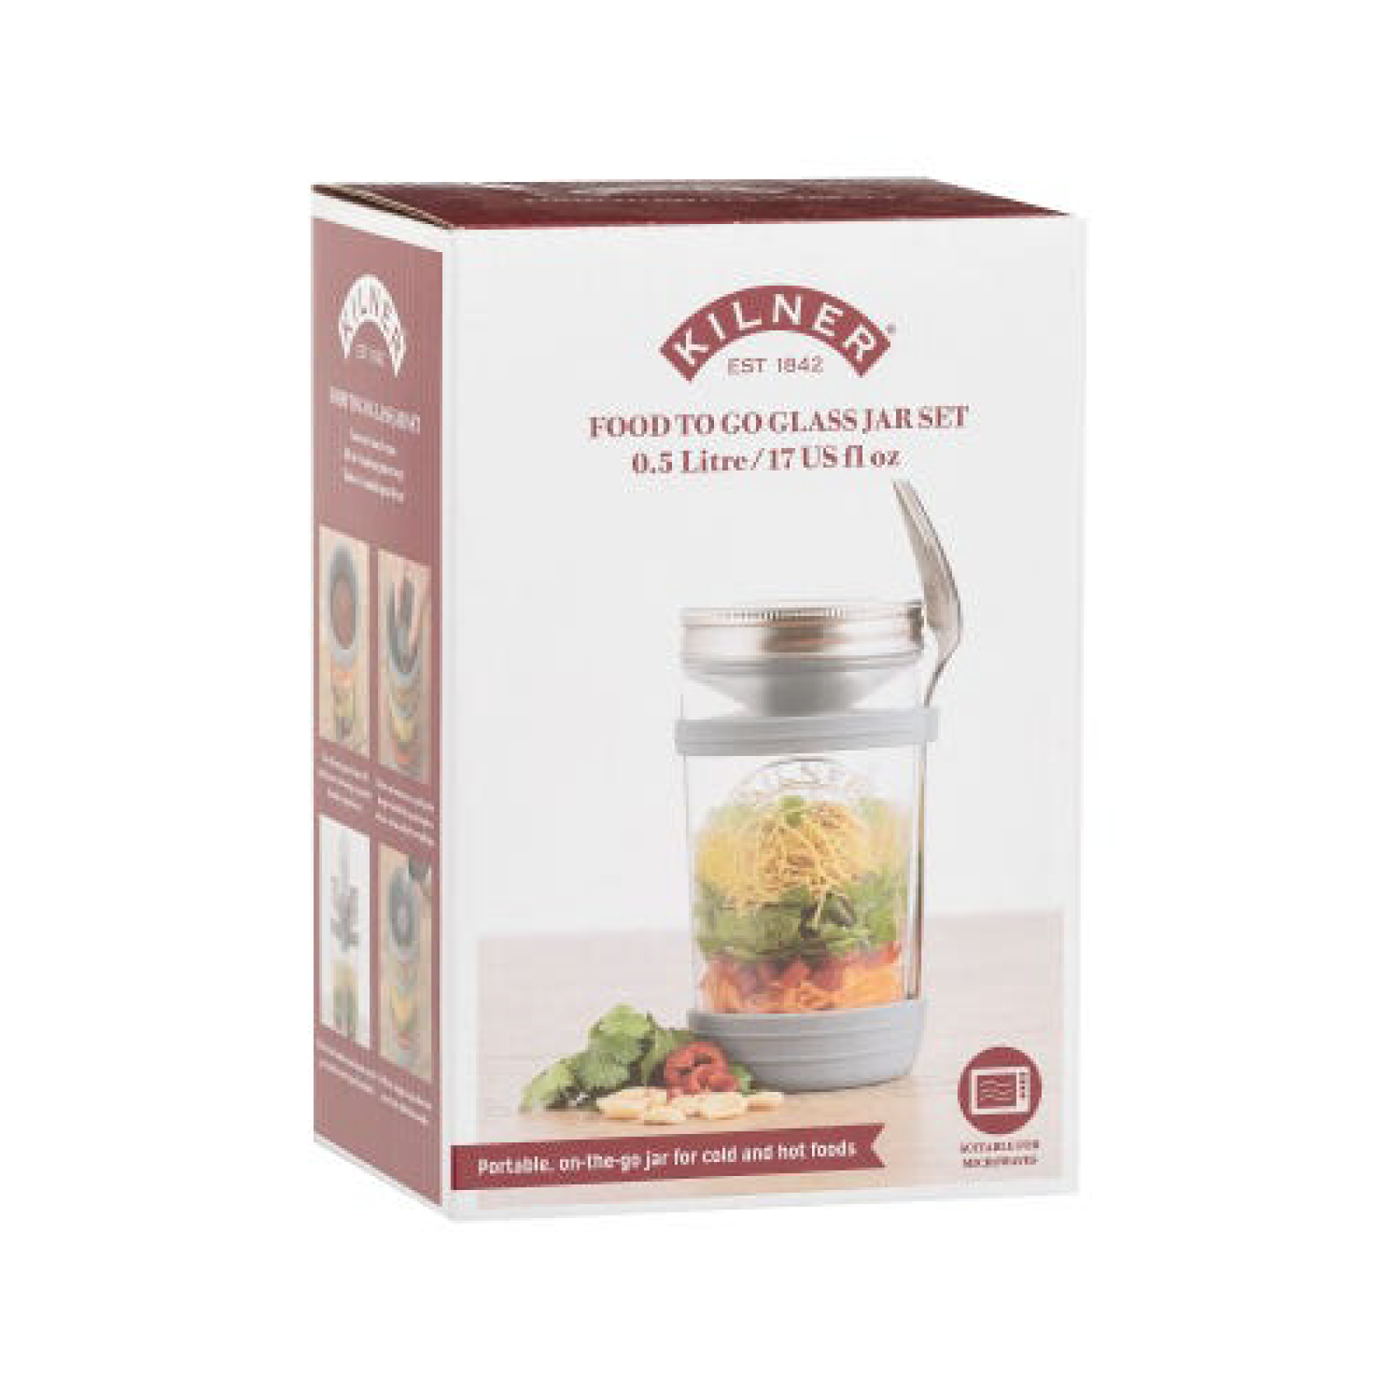 All-in-One Food To Go Set 500ml